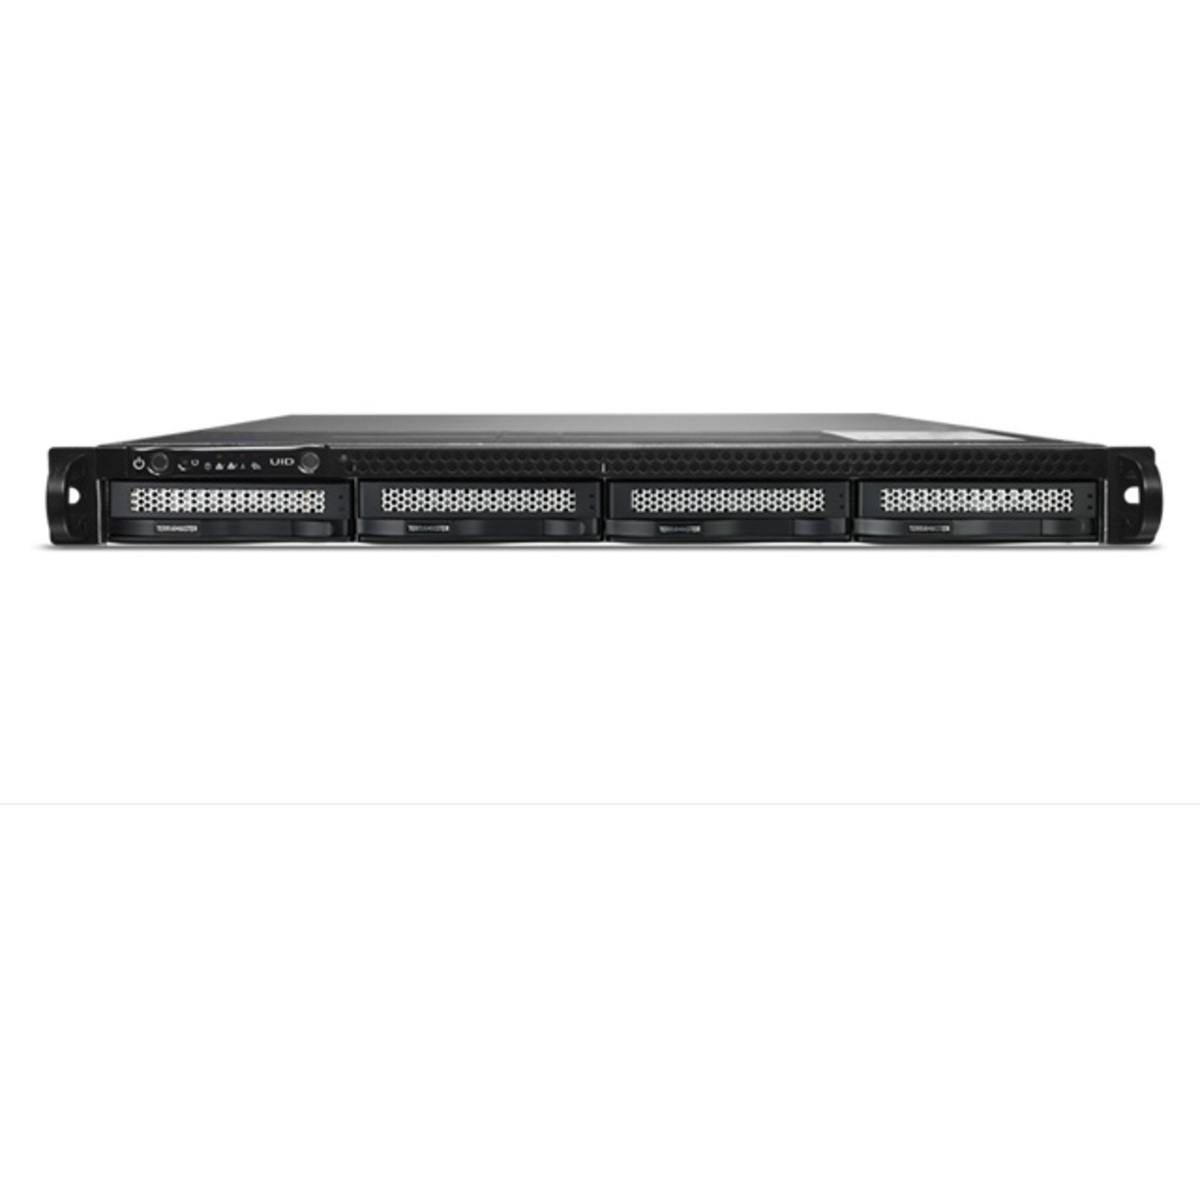 TerraMaster U4-111 1tb 4-Bay RackMount Multimedia / Power User / Business NAS - Network Attached Storage Device 2x500gb Samsung 870 EVO MZ-77E500BAM 2.5 560/530MB/s SATA 6Gb/s SSD CONSUMER Class Drives Installed - Burn-In Tested U4-111